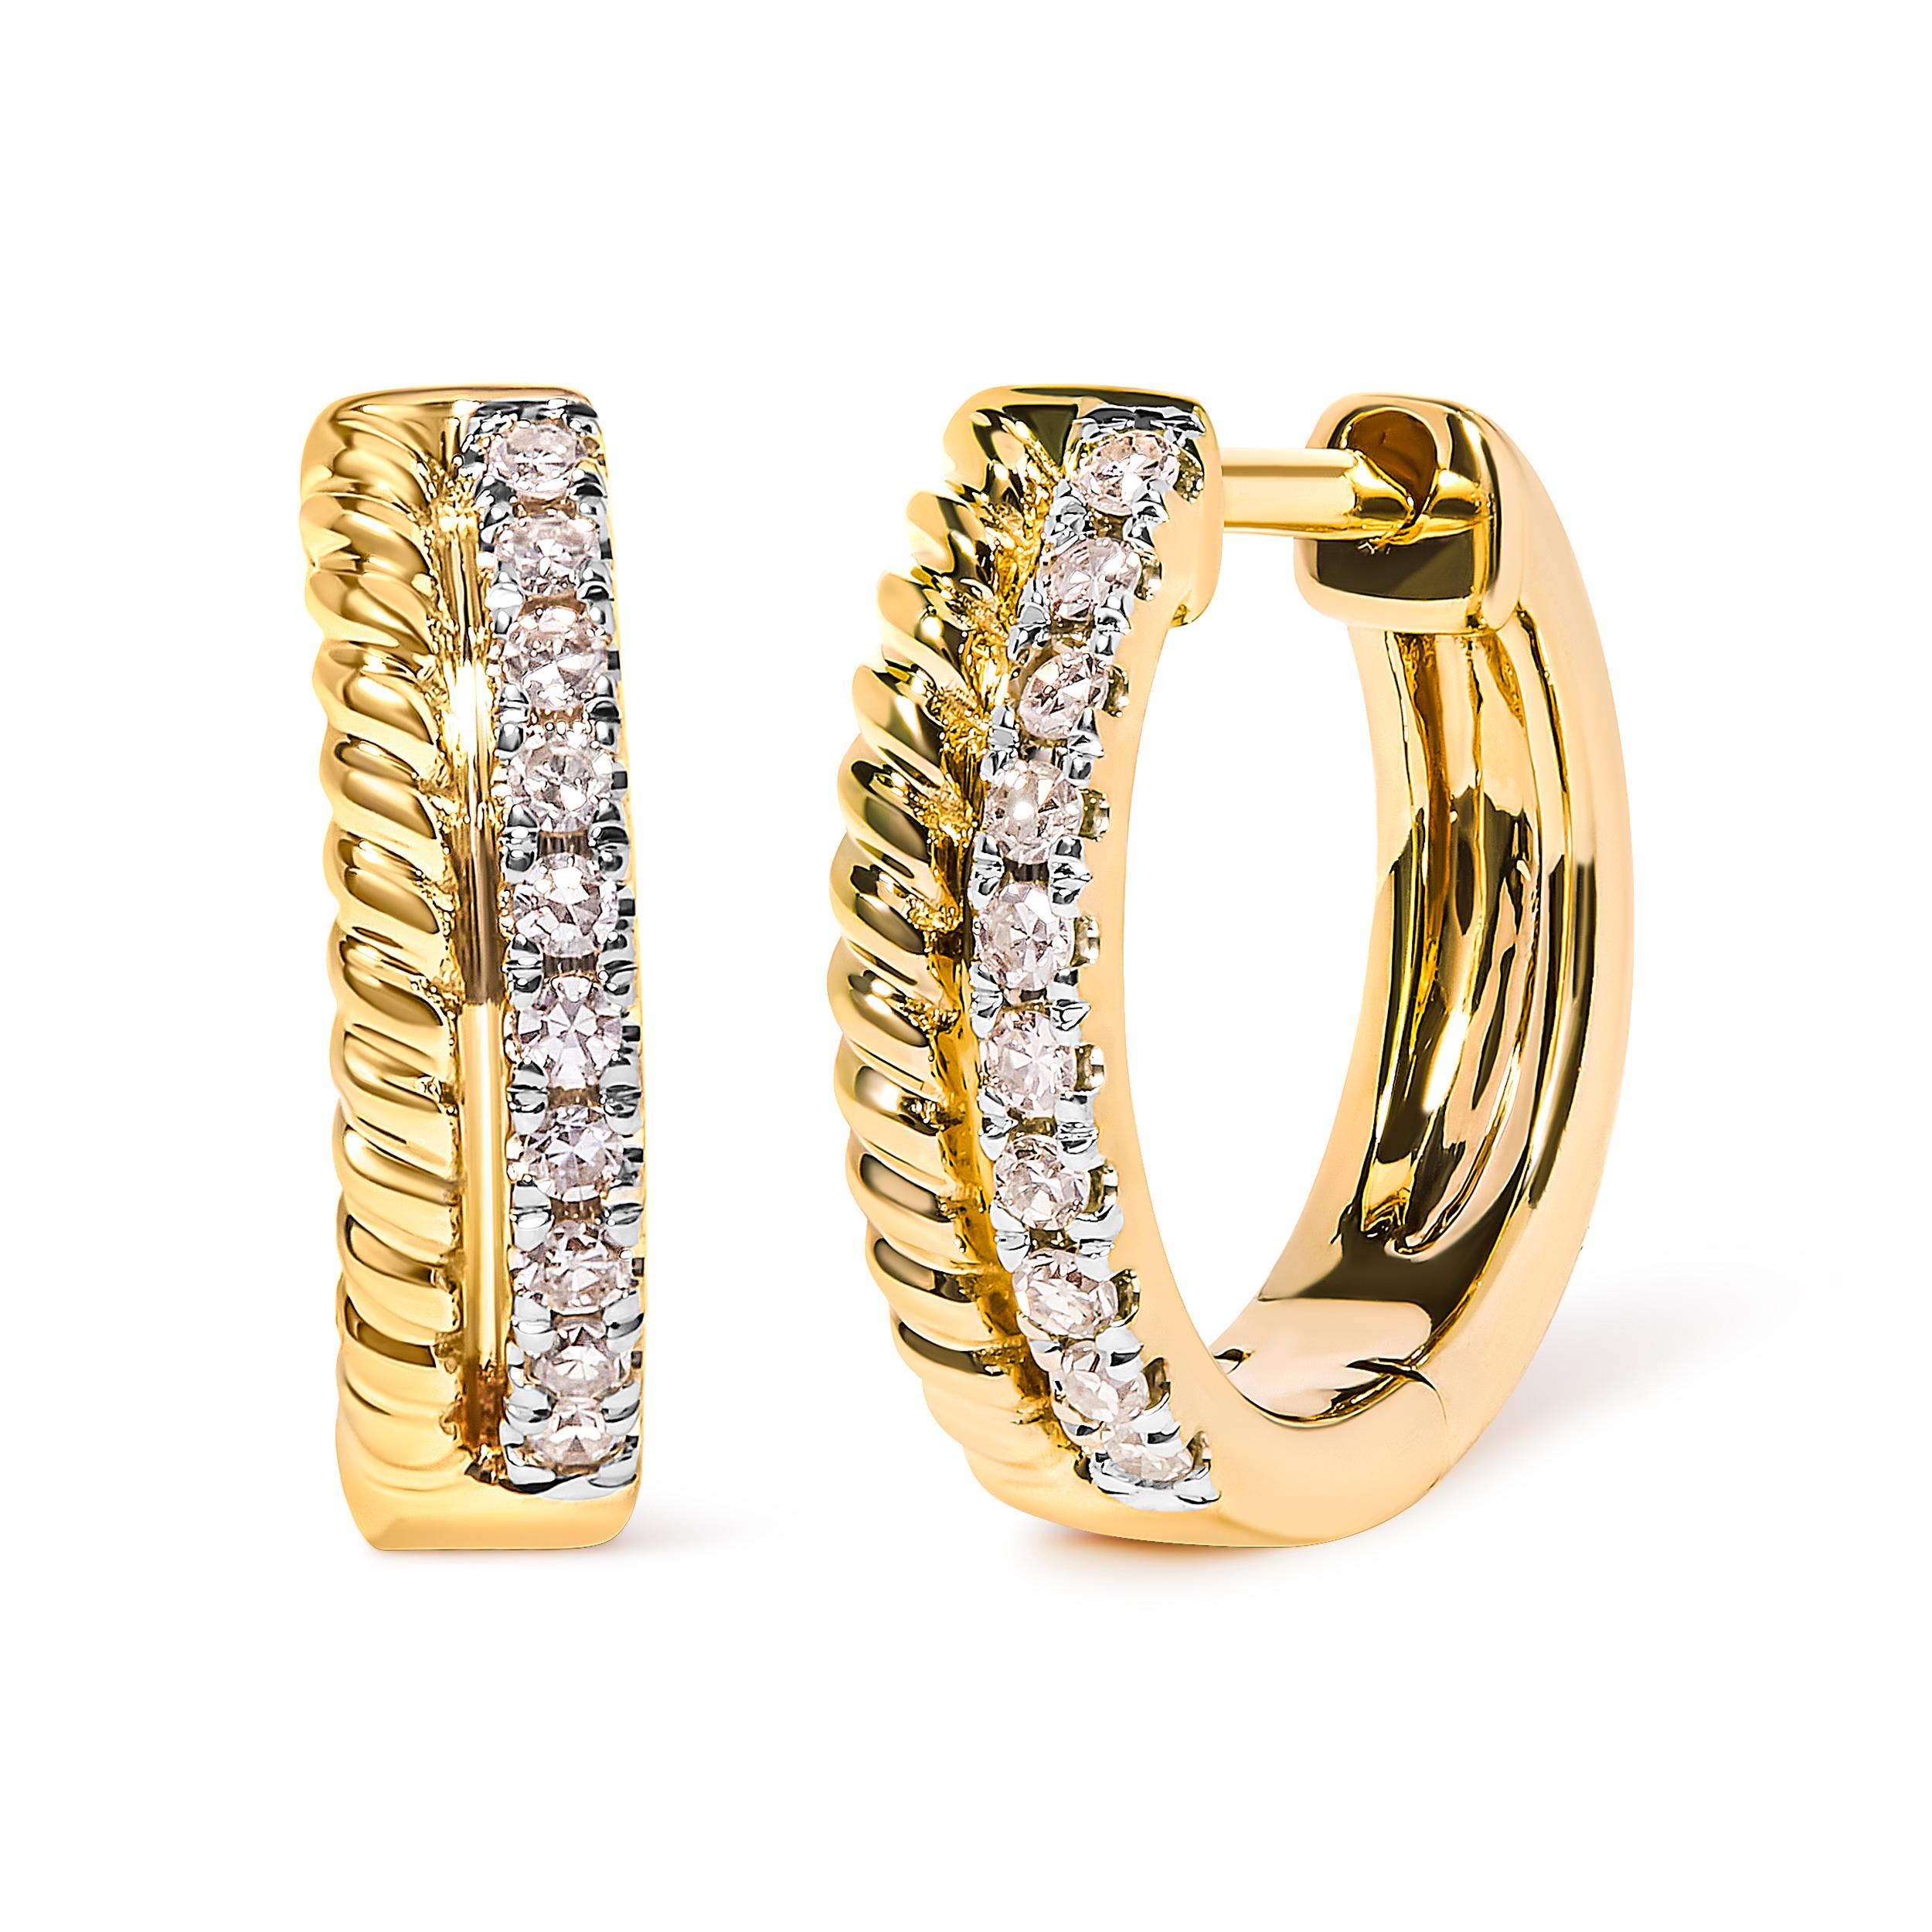 Introducing a dazzling masterpiece that will elevate your style to new heights. Crafted with utmost precision, these 10K Yellow Gold Huggy Hoop Earrings are adorned with a mesmerizing array of 20 natural round diamonds. The rope twist design adds a